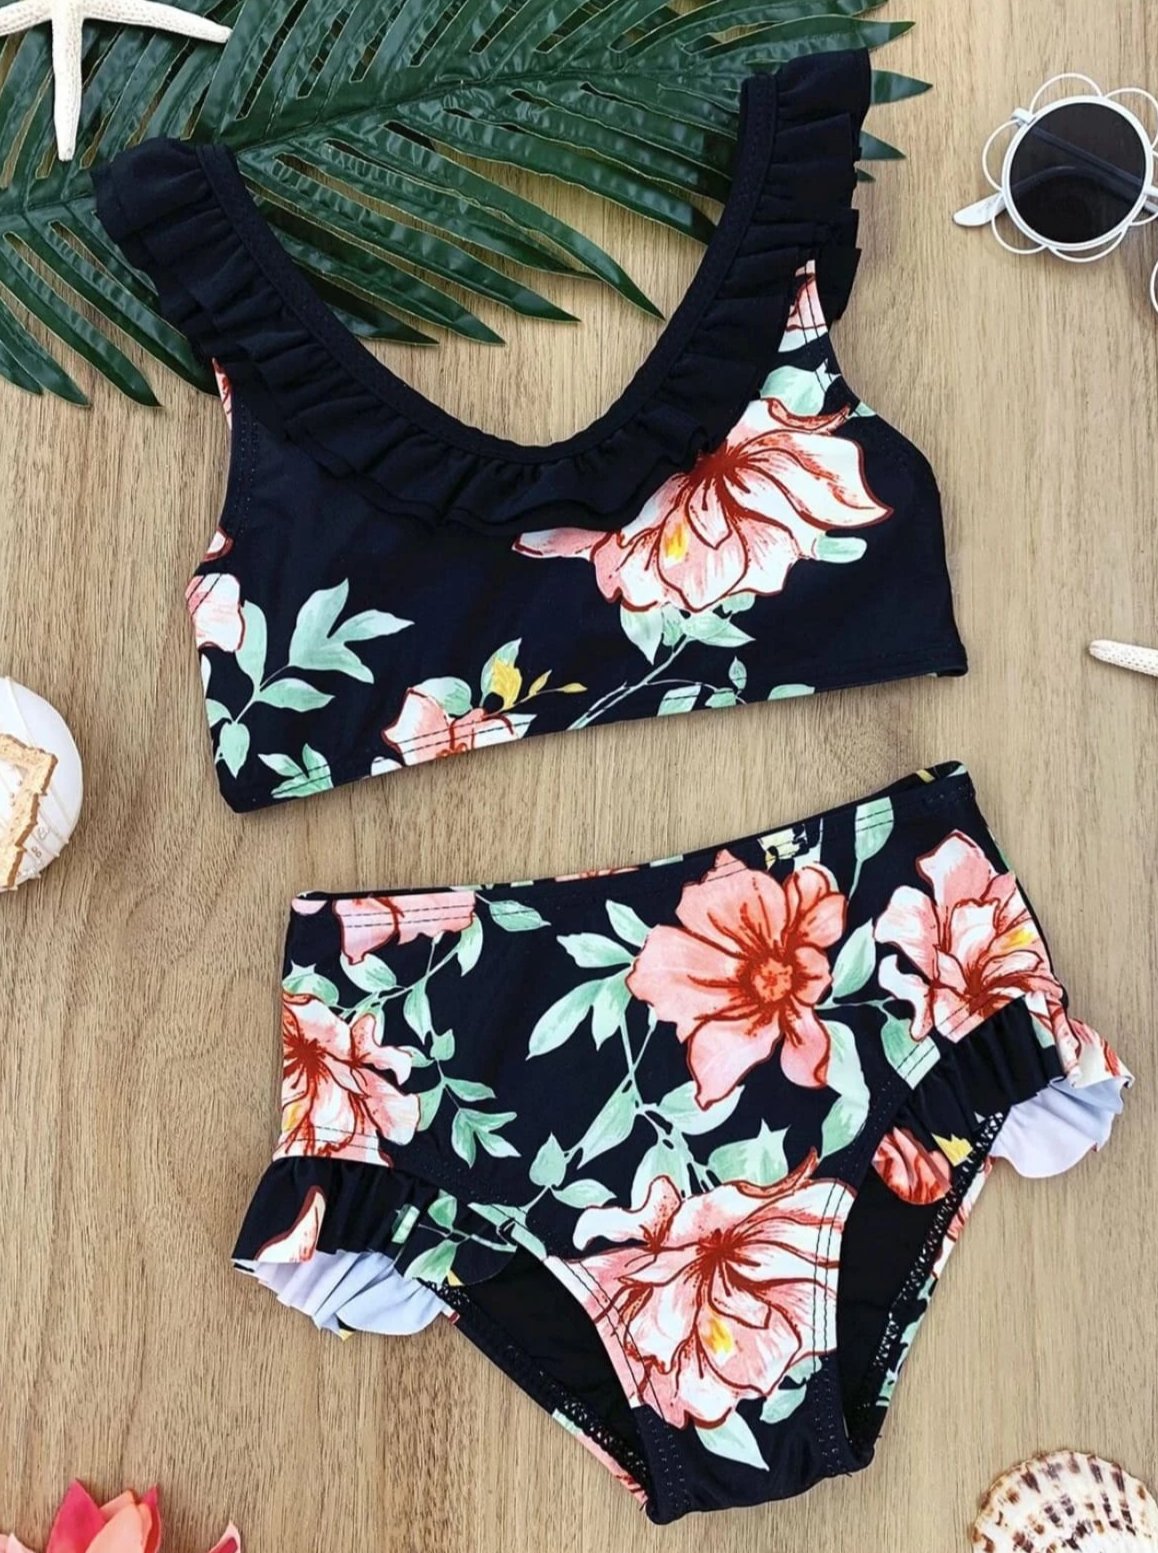 Girls Floral Ruffled Two Piece Swimsuit - Black / 4T - Girls Two Piece Swimsuit